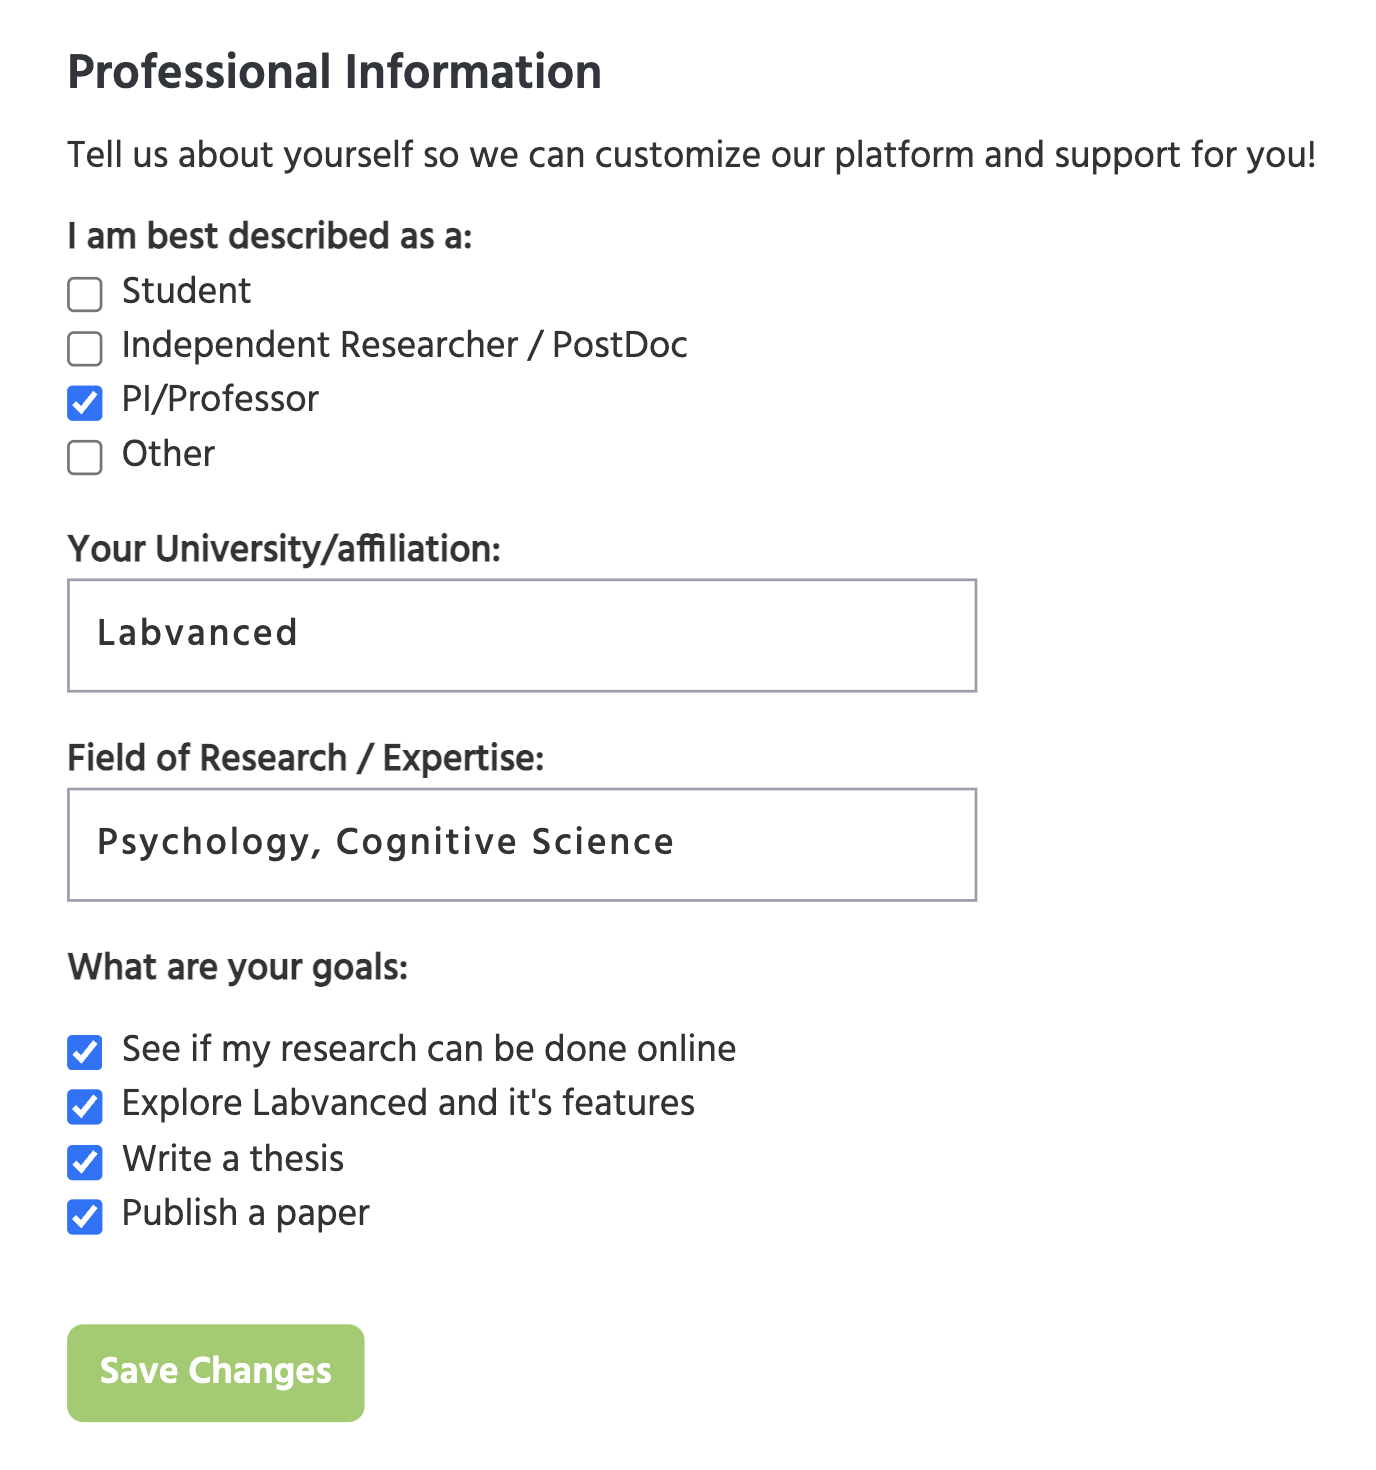 Section for specifying personal information like your university affiliation and research goals